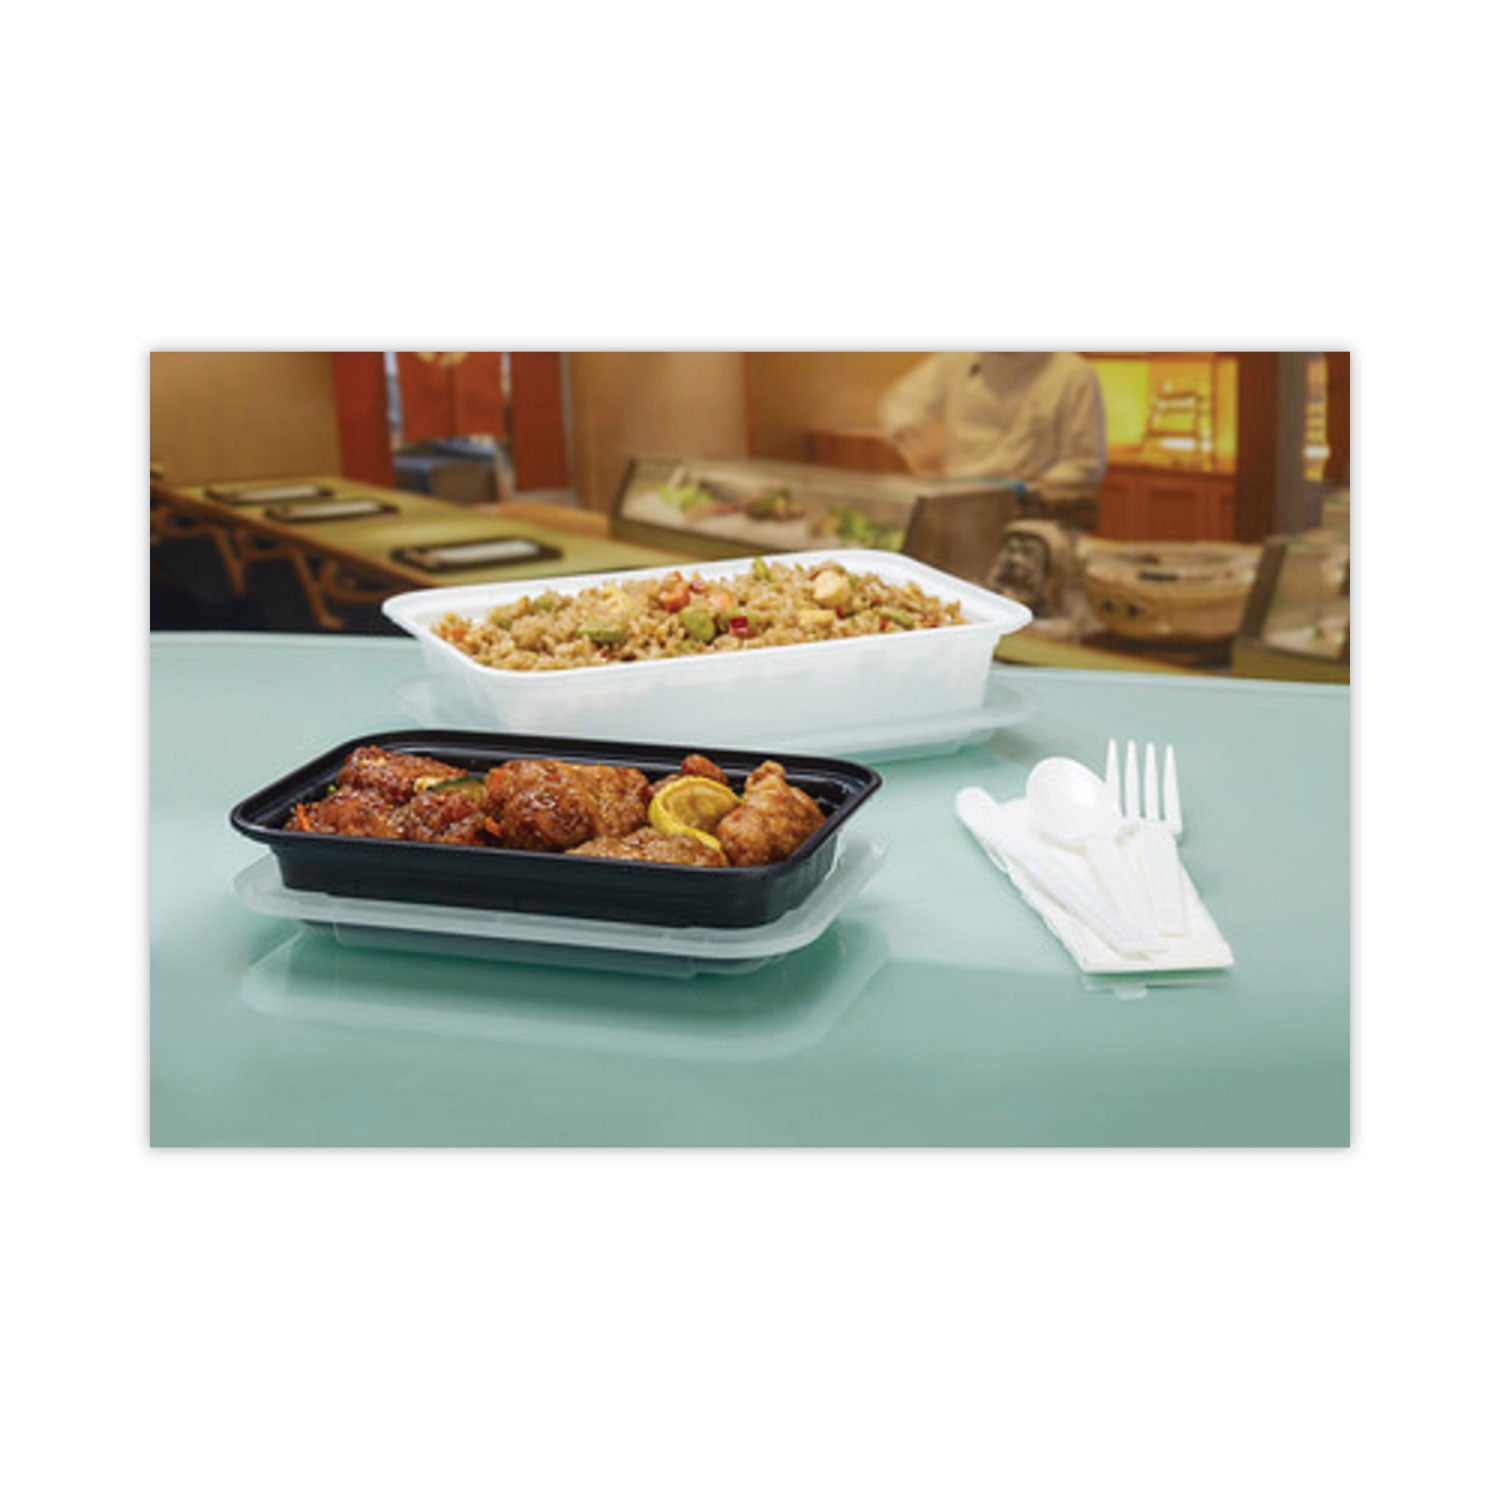 newspring-versatainer-microwavable-containers-88-x-6-x-25-white-clear-base-lid-combo-150-carton_pctnc888 - 4